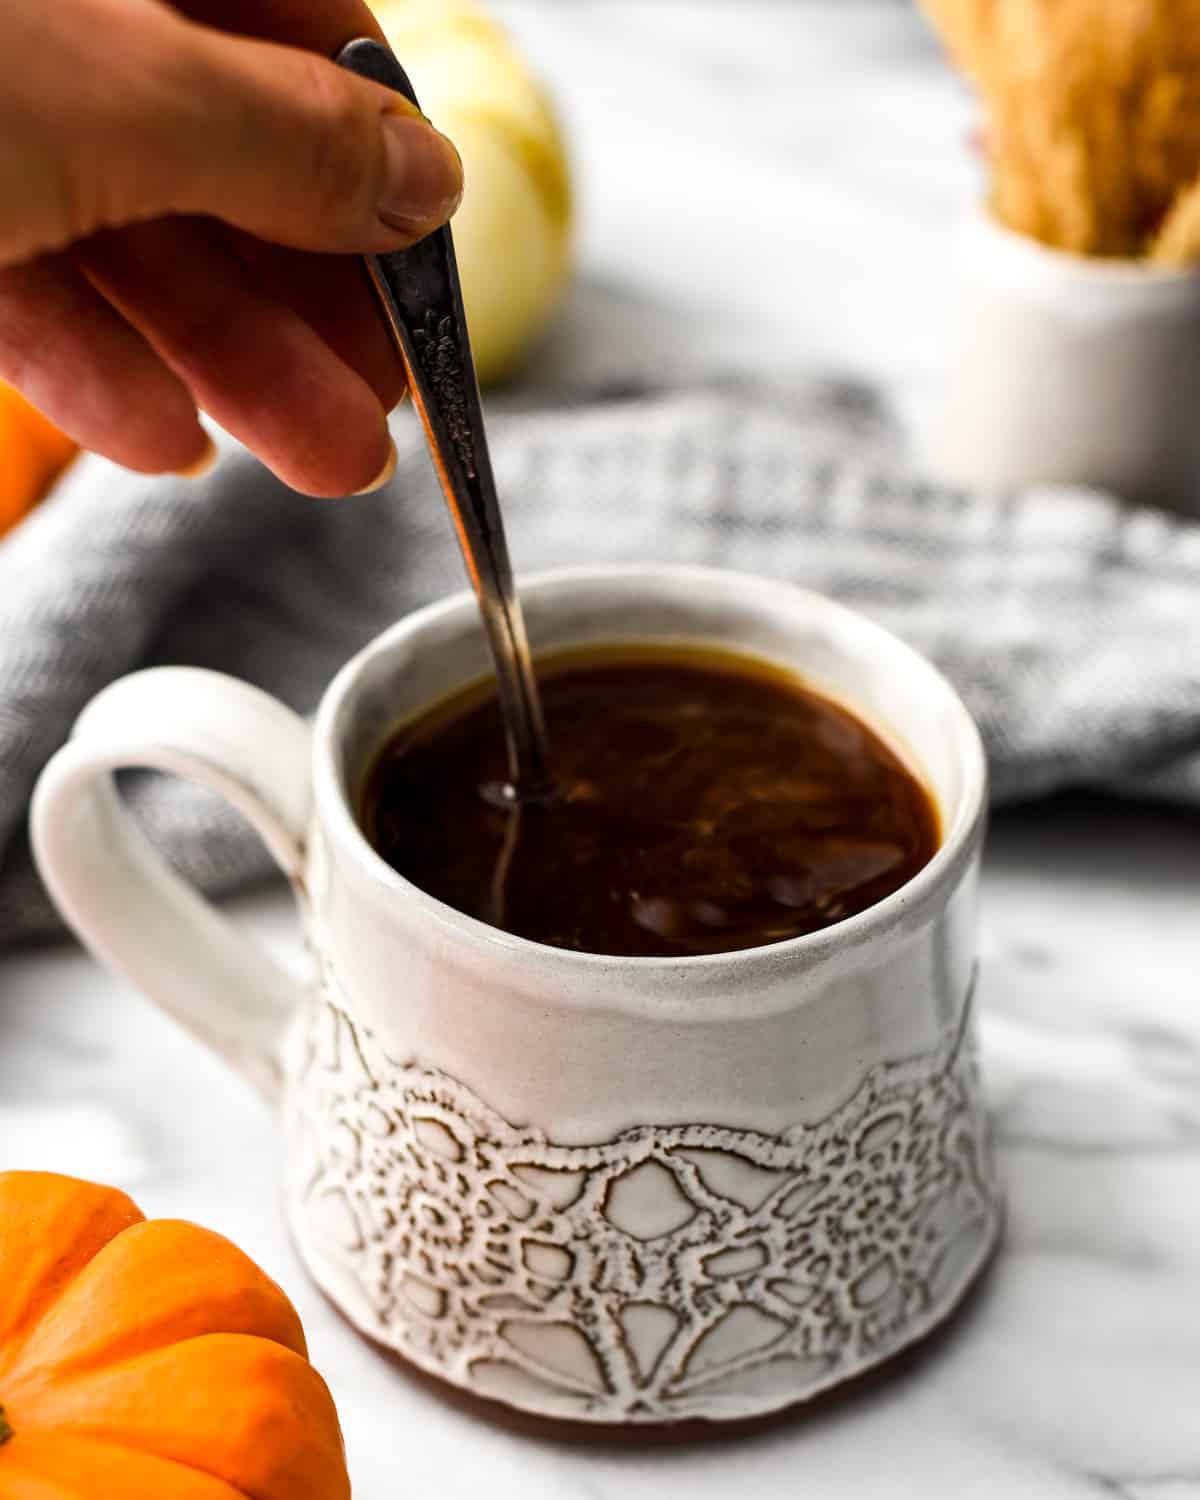 Hand holding a spoon stirring Homemade Pumpkin Coffee Creamer into a cup of coffee